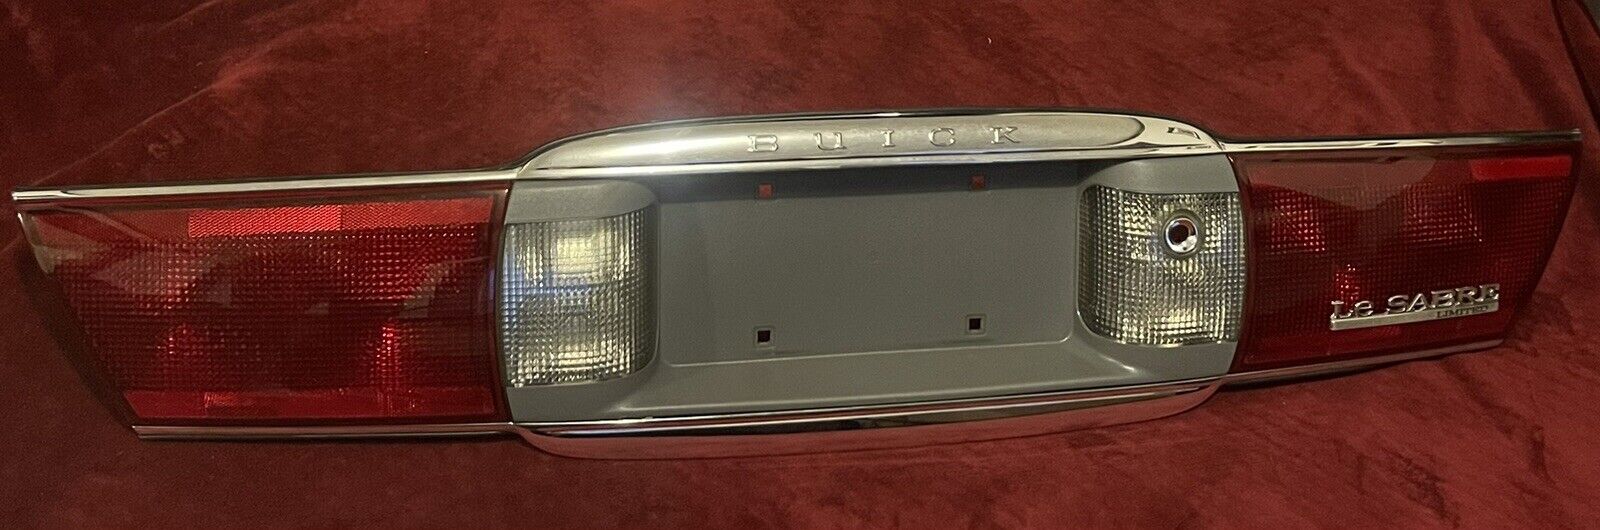 03-05 Buick LeSabre Limited Rear Center Tail Light Panel OEM 16525084